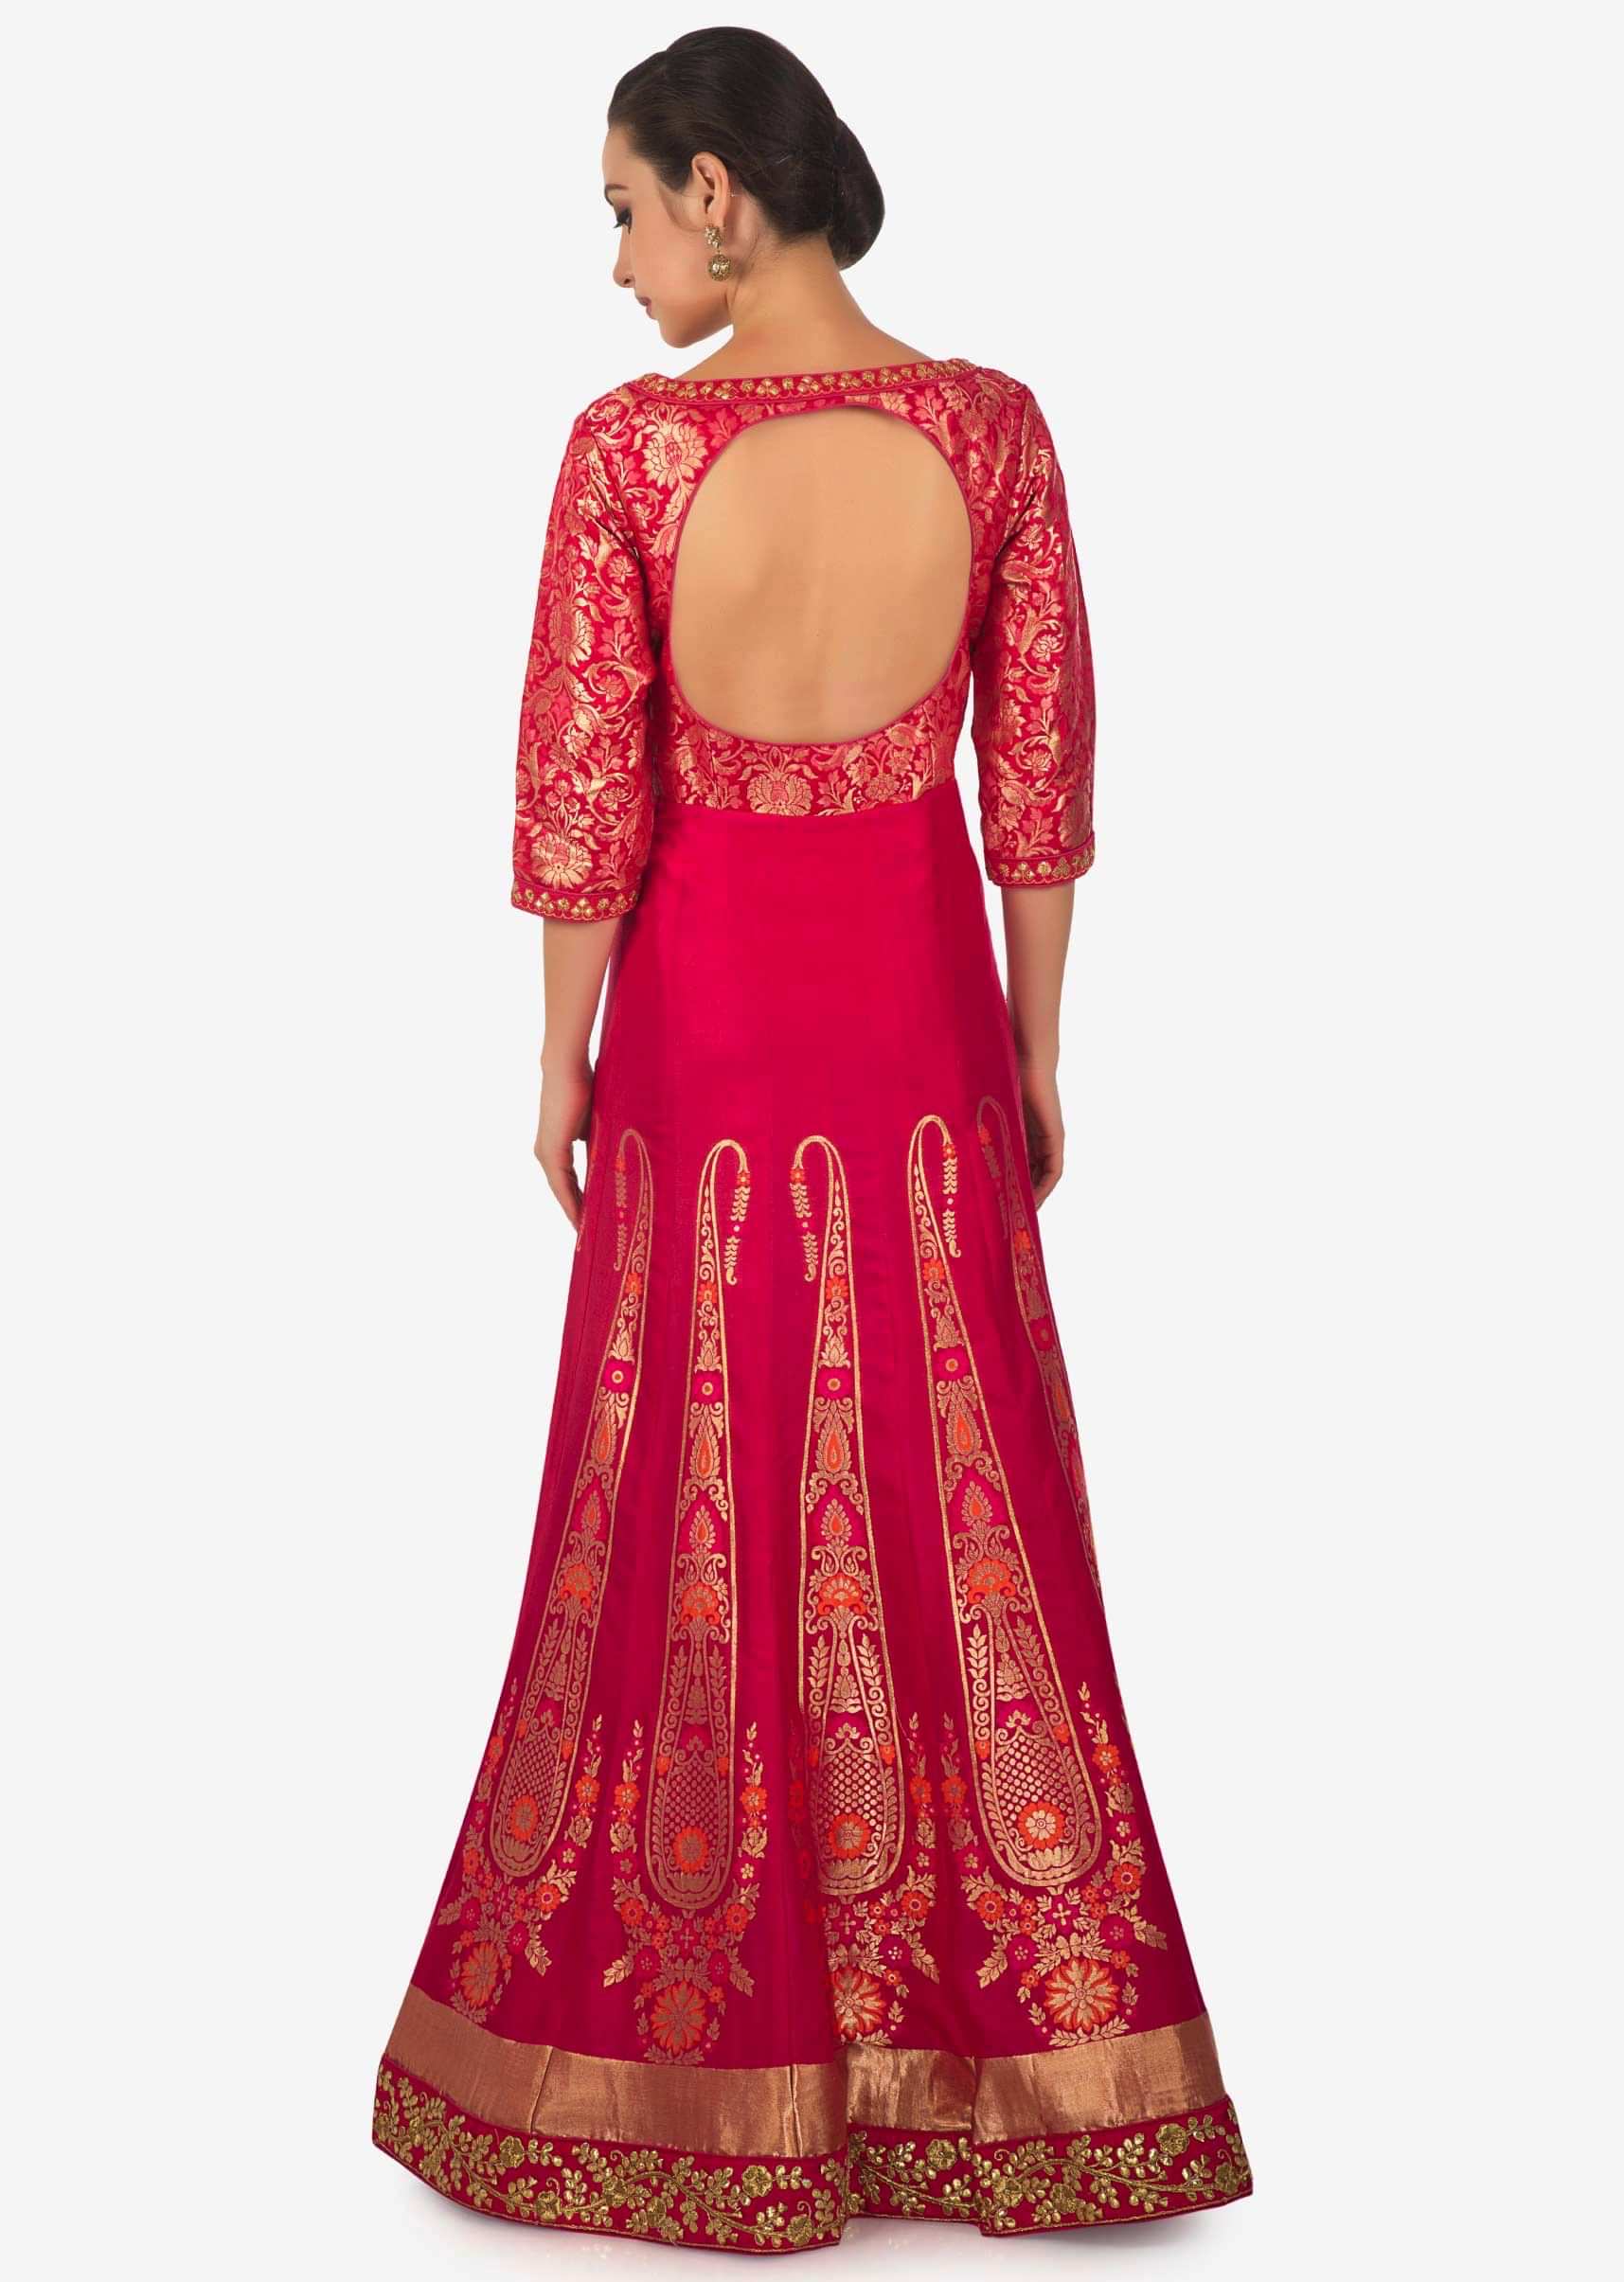 Rani pink brocade anarkali suit adorn in gotta patch embroidery only on Kalki